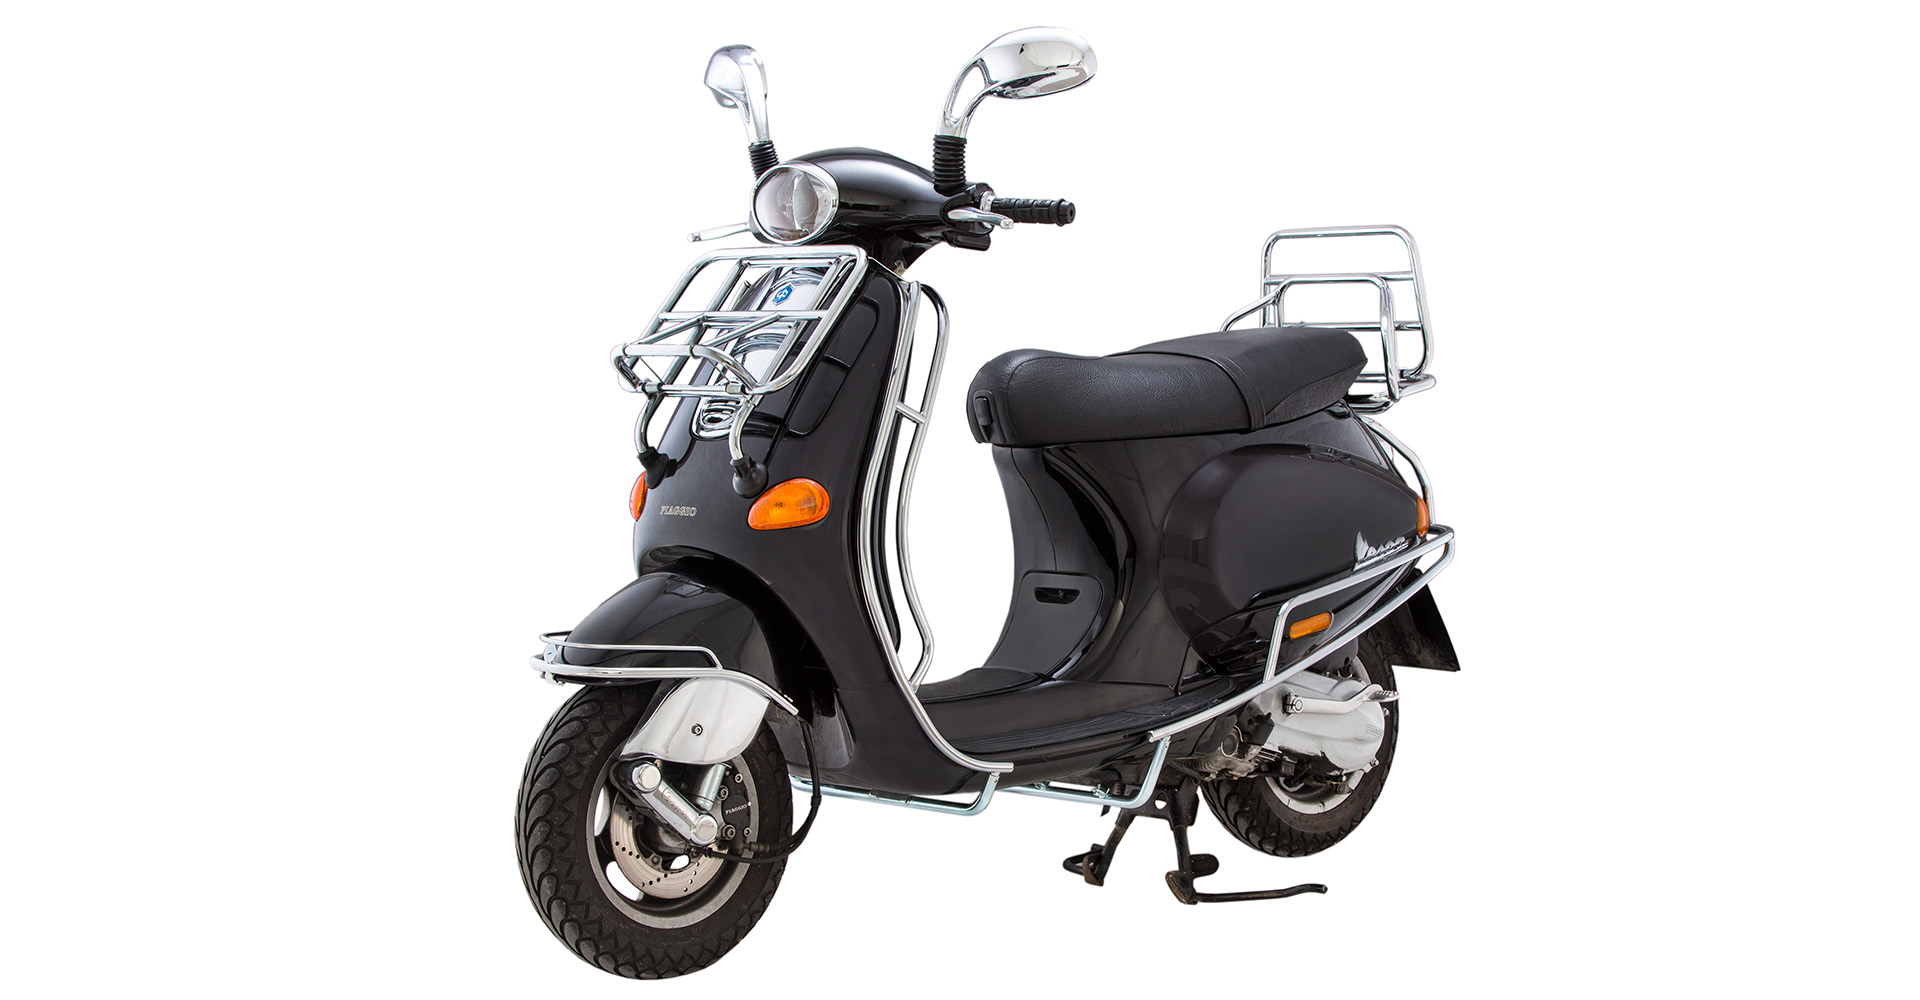 Vespa ET2 and ET4 – similarities and differences